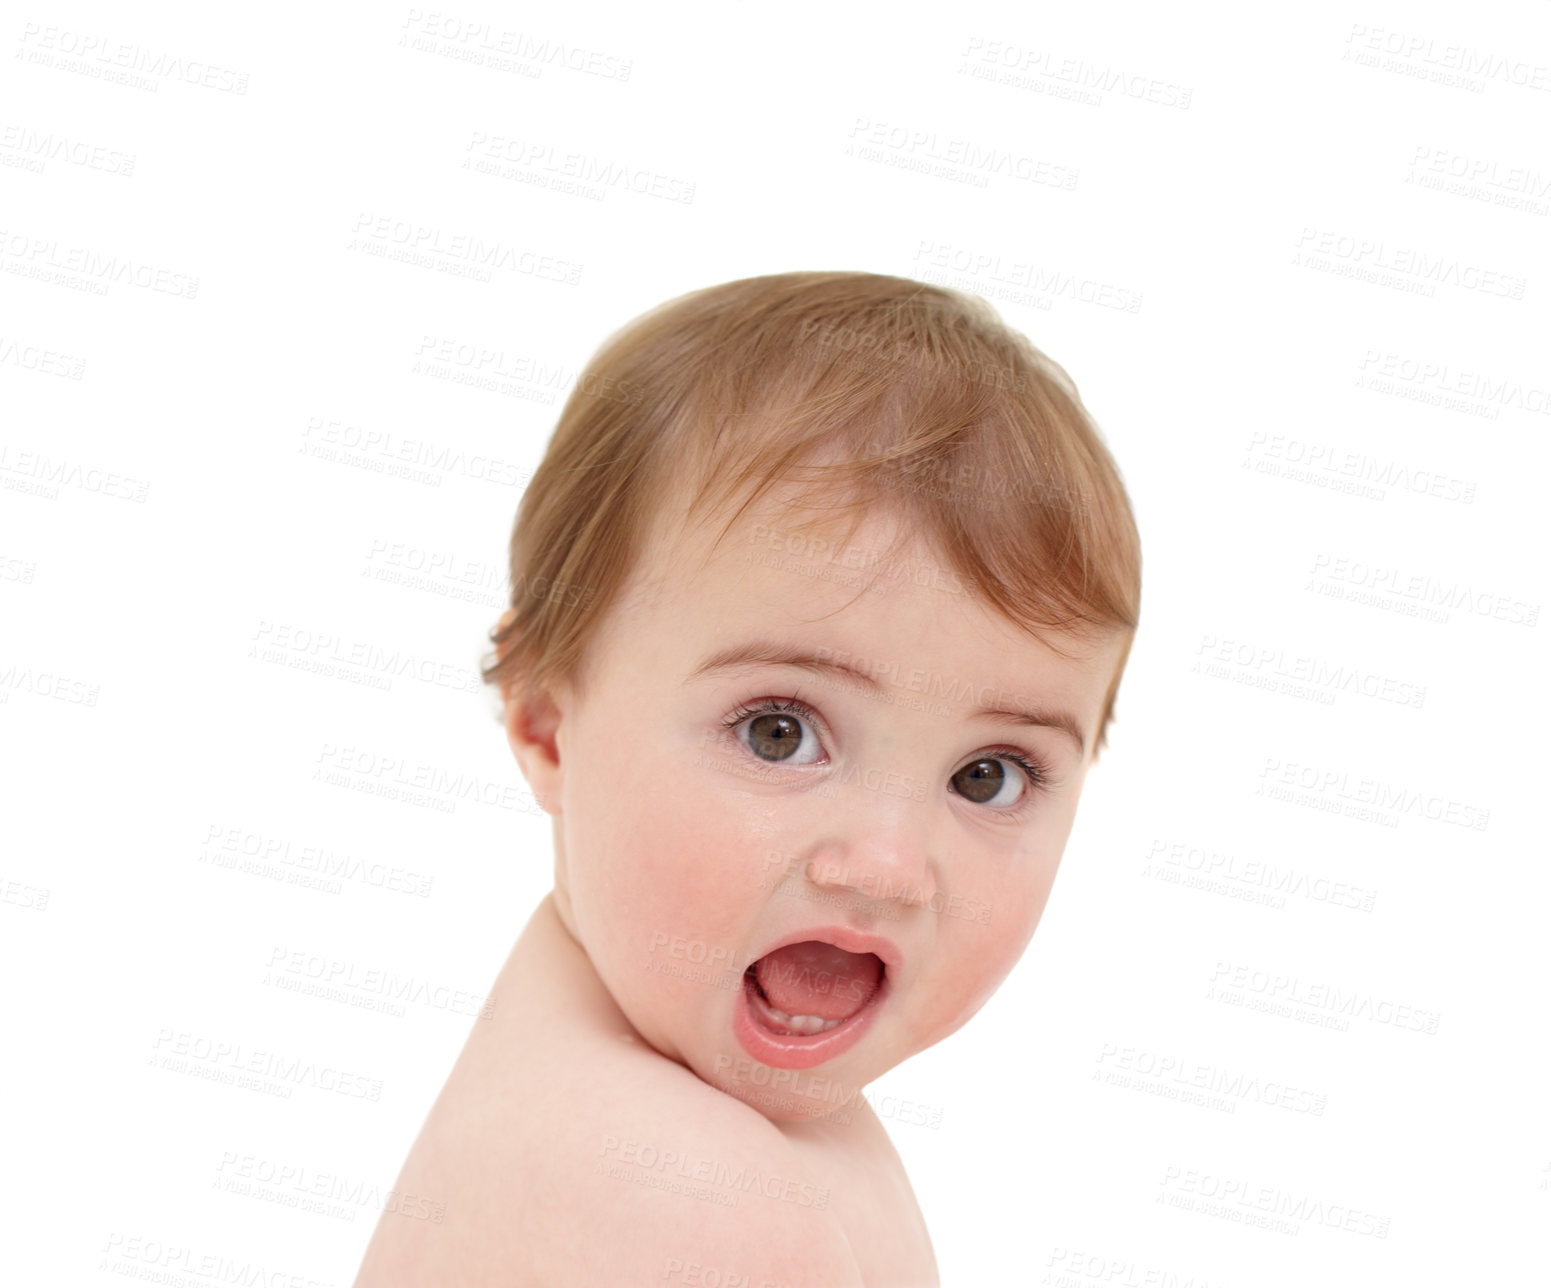 Buy stock photo Portrait of a cute baby isolated on white